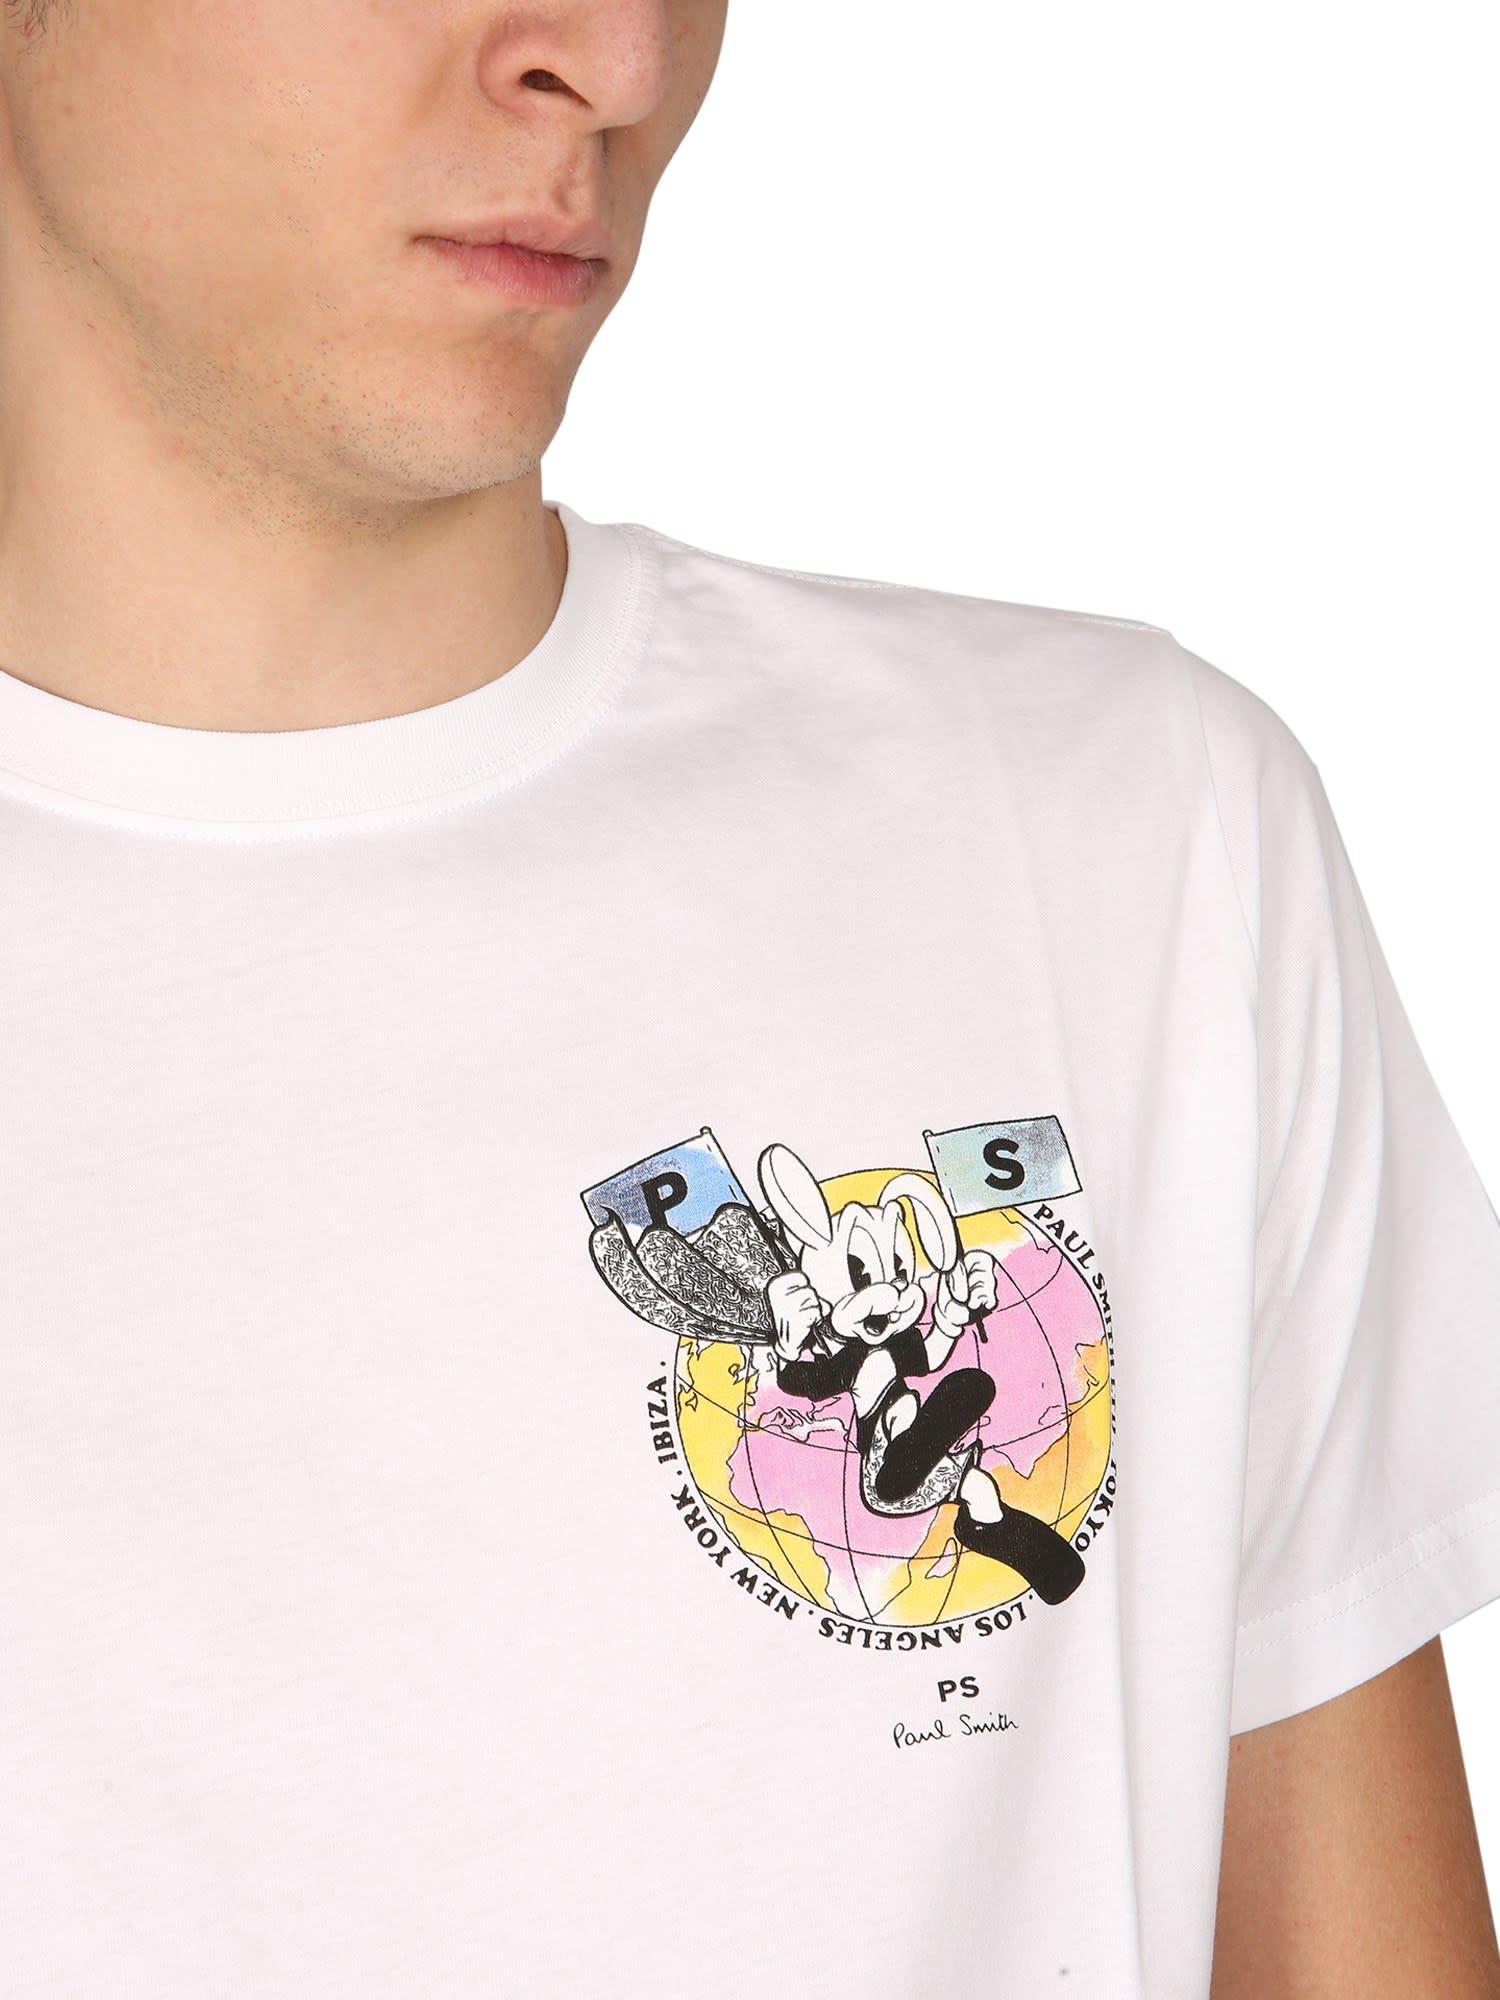 PS by Paul Smith Cotton Jersey "rabbit" T-shirt in White for Men - Save 43%  | Lyst